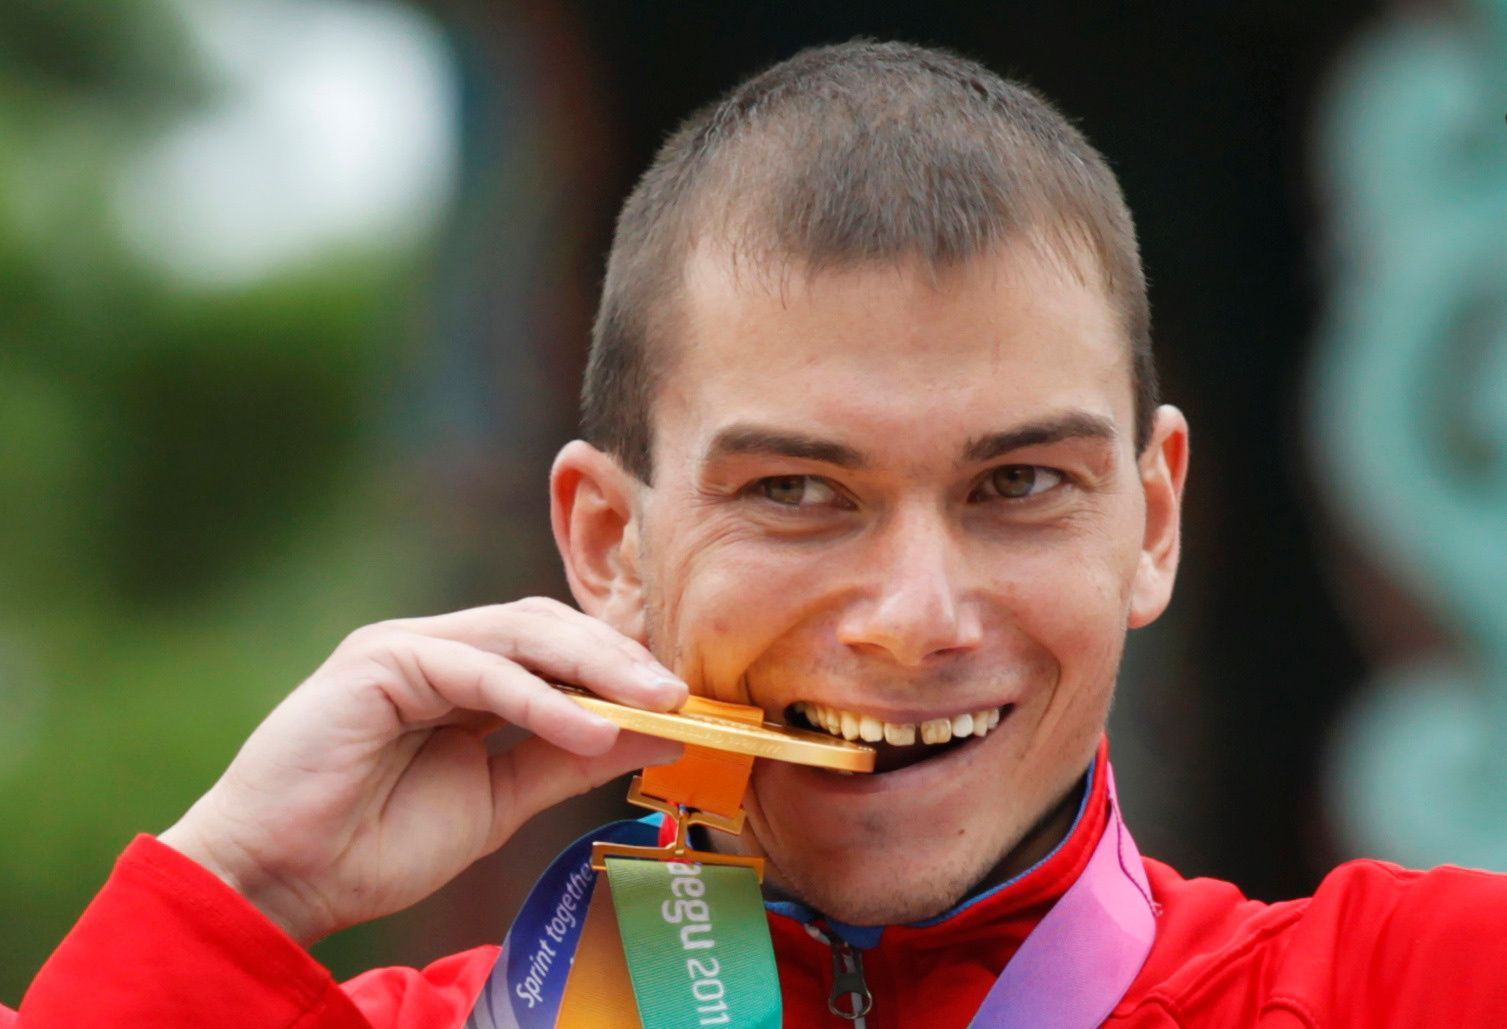 FILE PHOTO: Bakulin of Russia bites his gold medal after the men's 50 km race walk final at the IAAF World Athletics Championships in Daegu